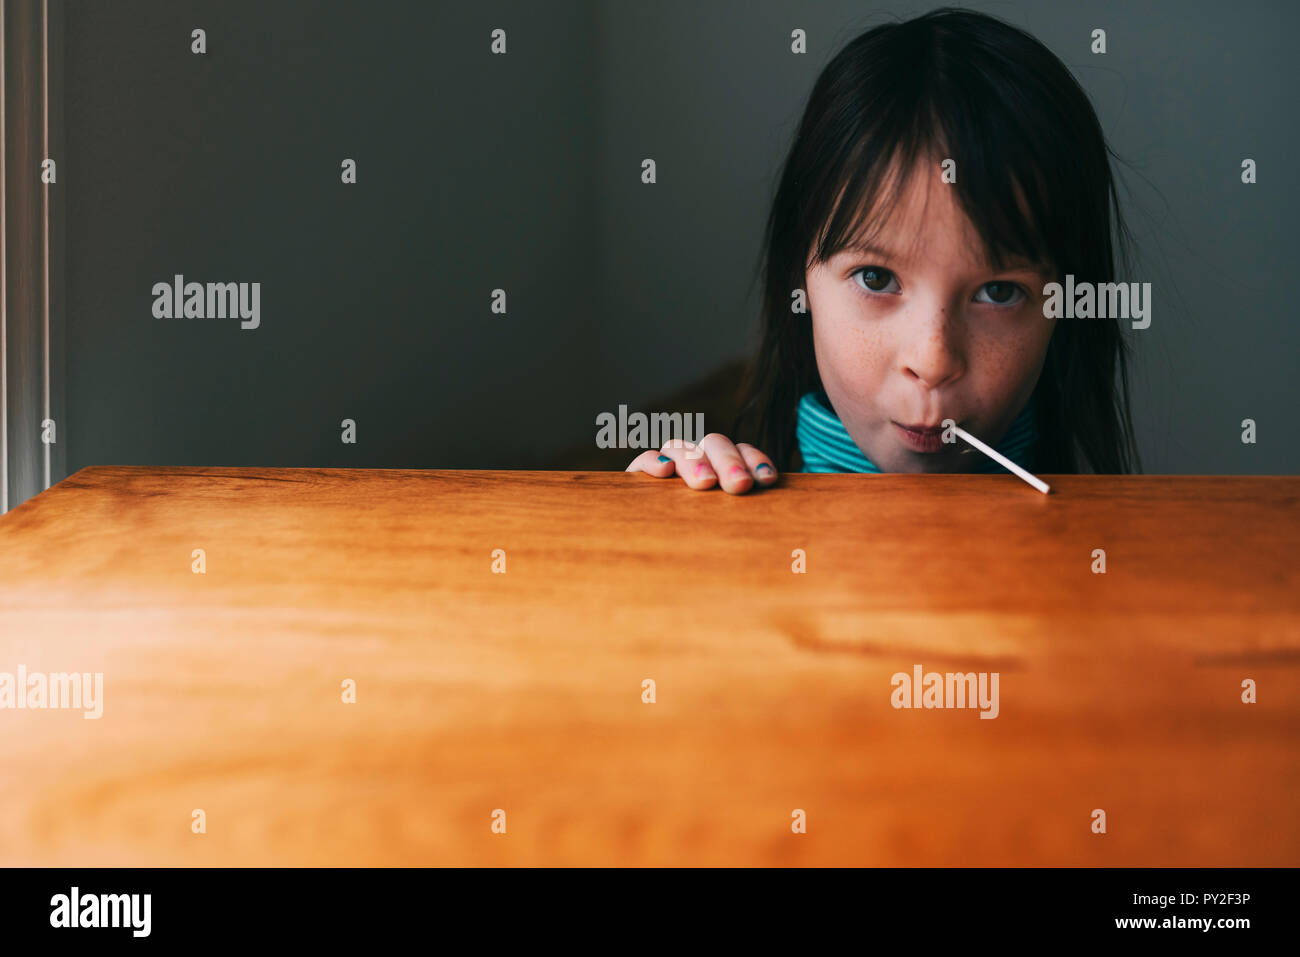 Portrait of a girl eating a lollipop Stock Photo